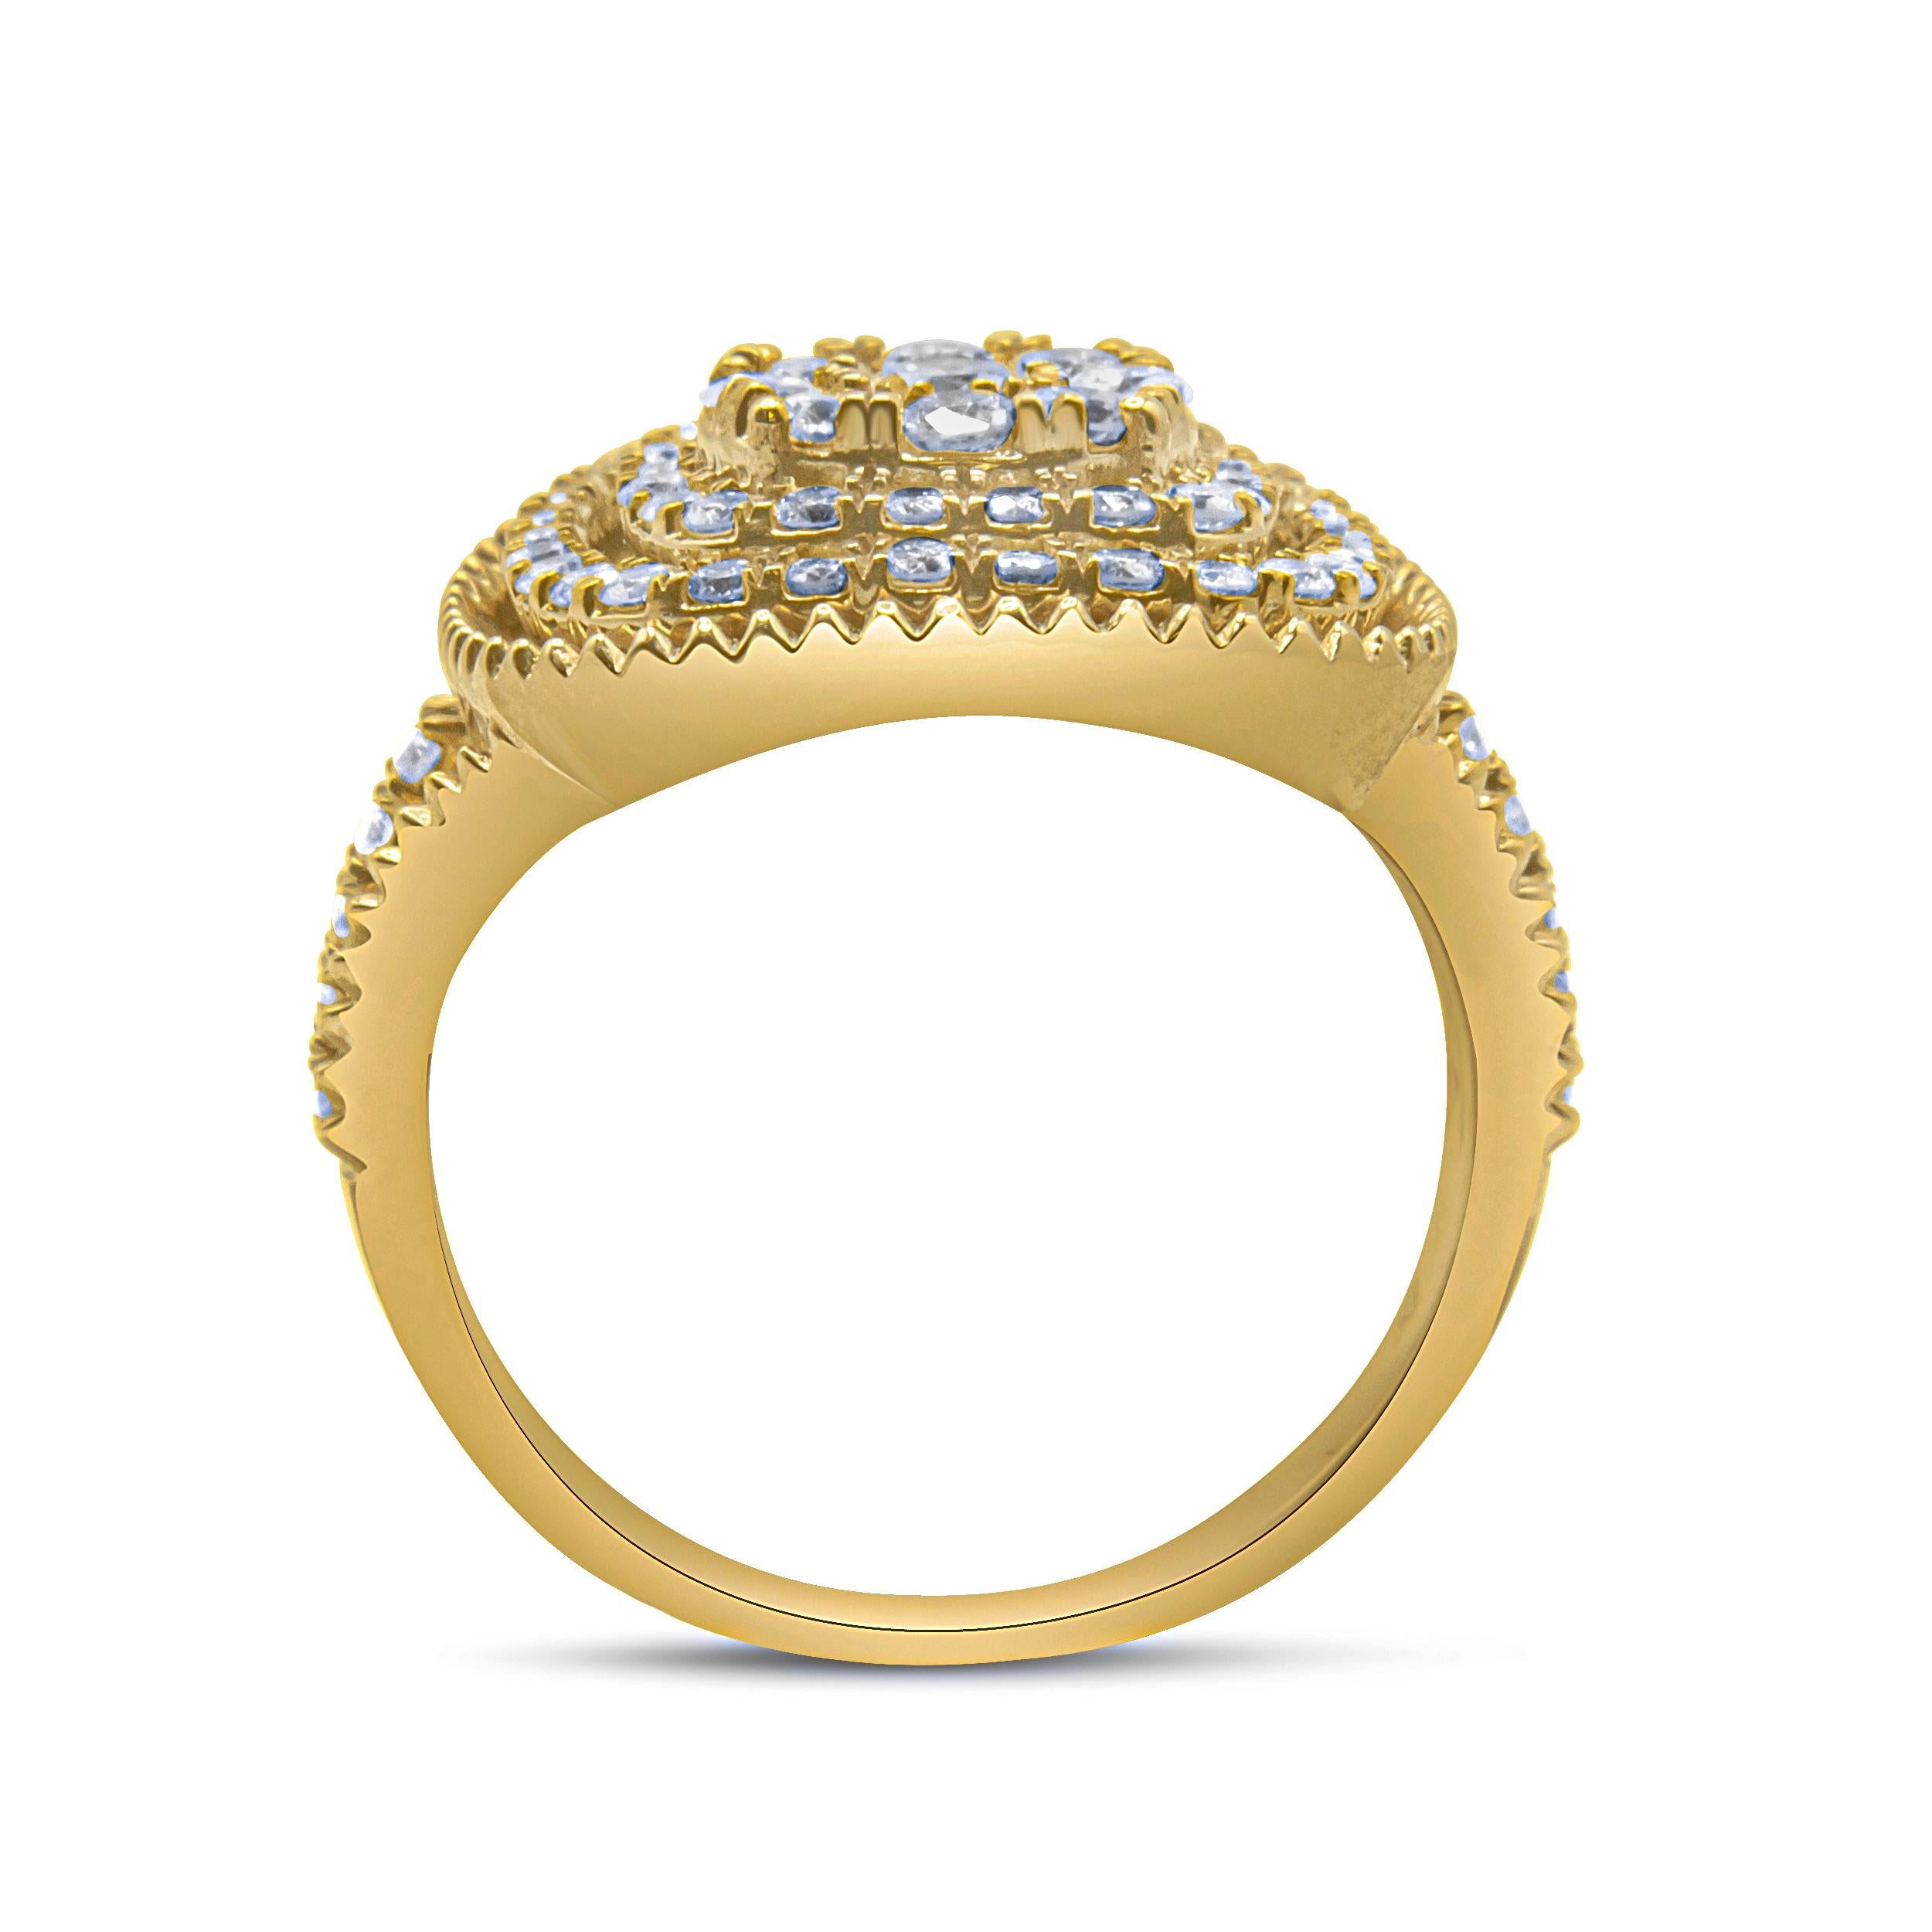 For Sale:  10K Yellow Gold Plated .925 Sterling Silver 1 1/4 Carat Diamond Cocktail Ring 5